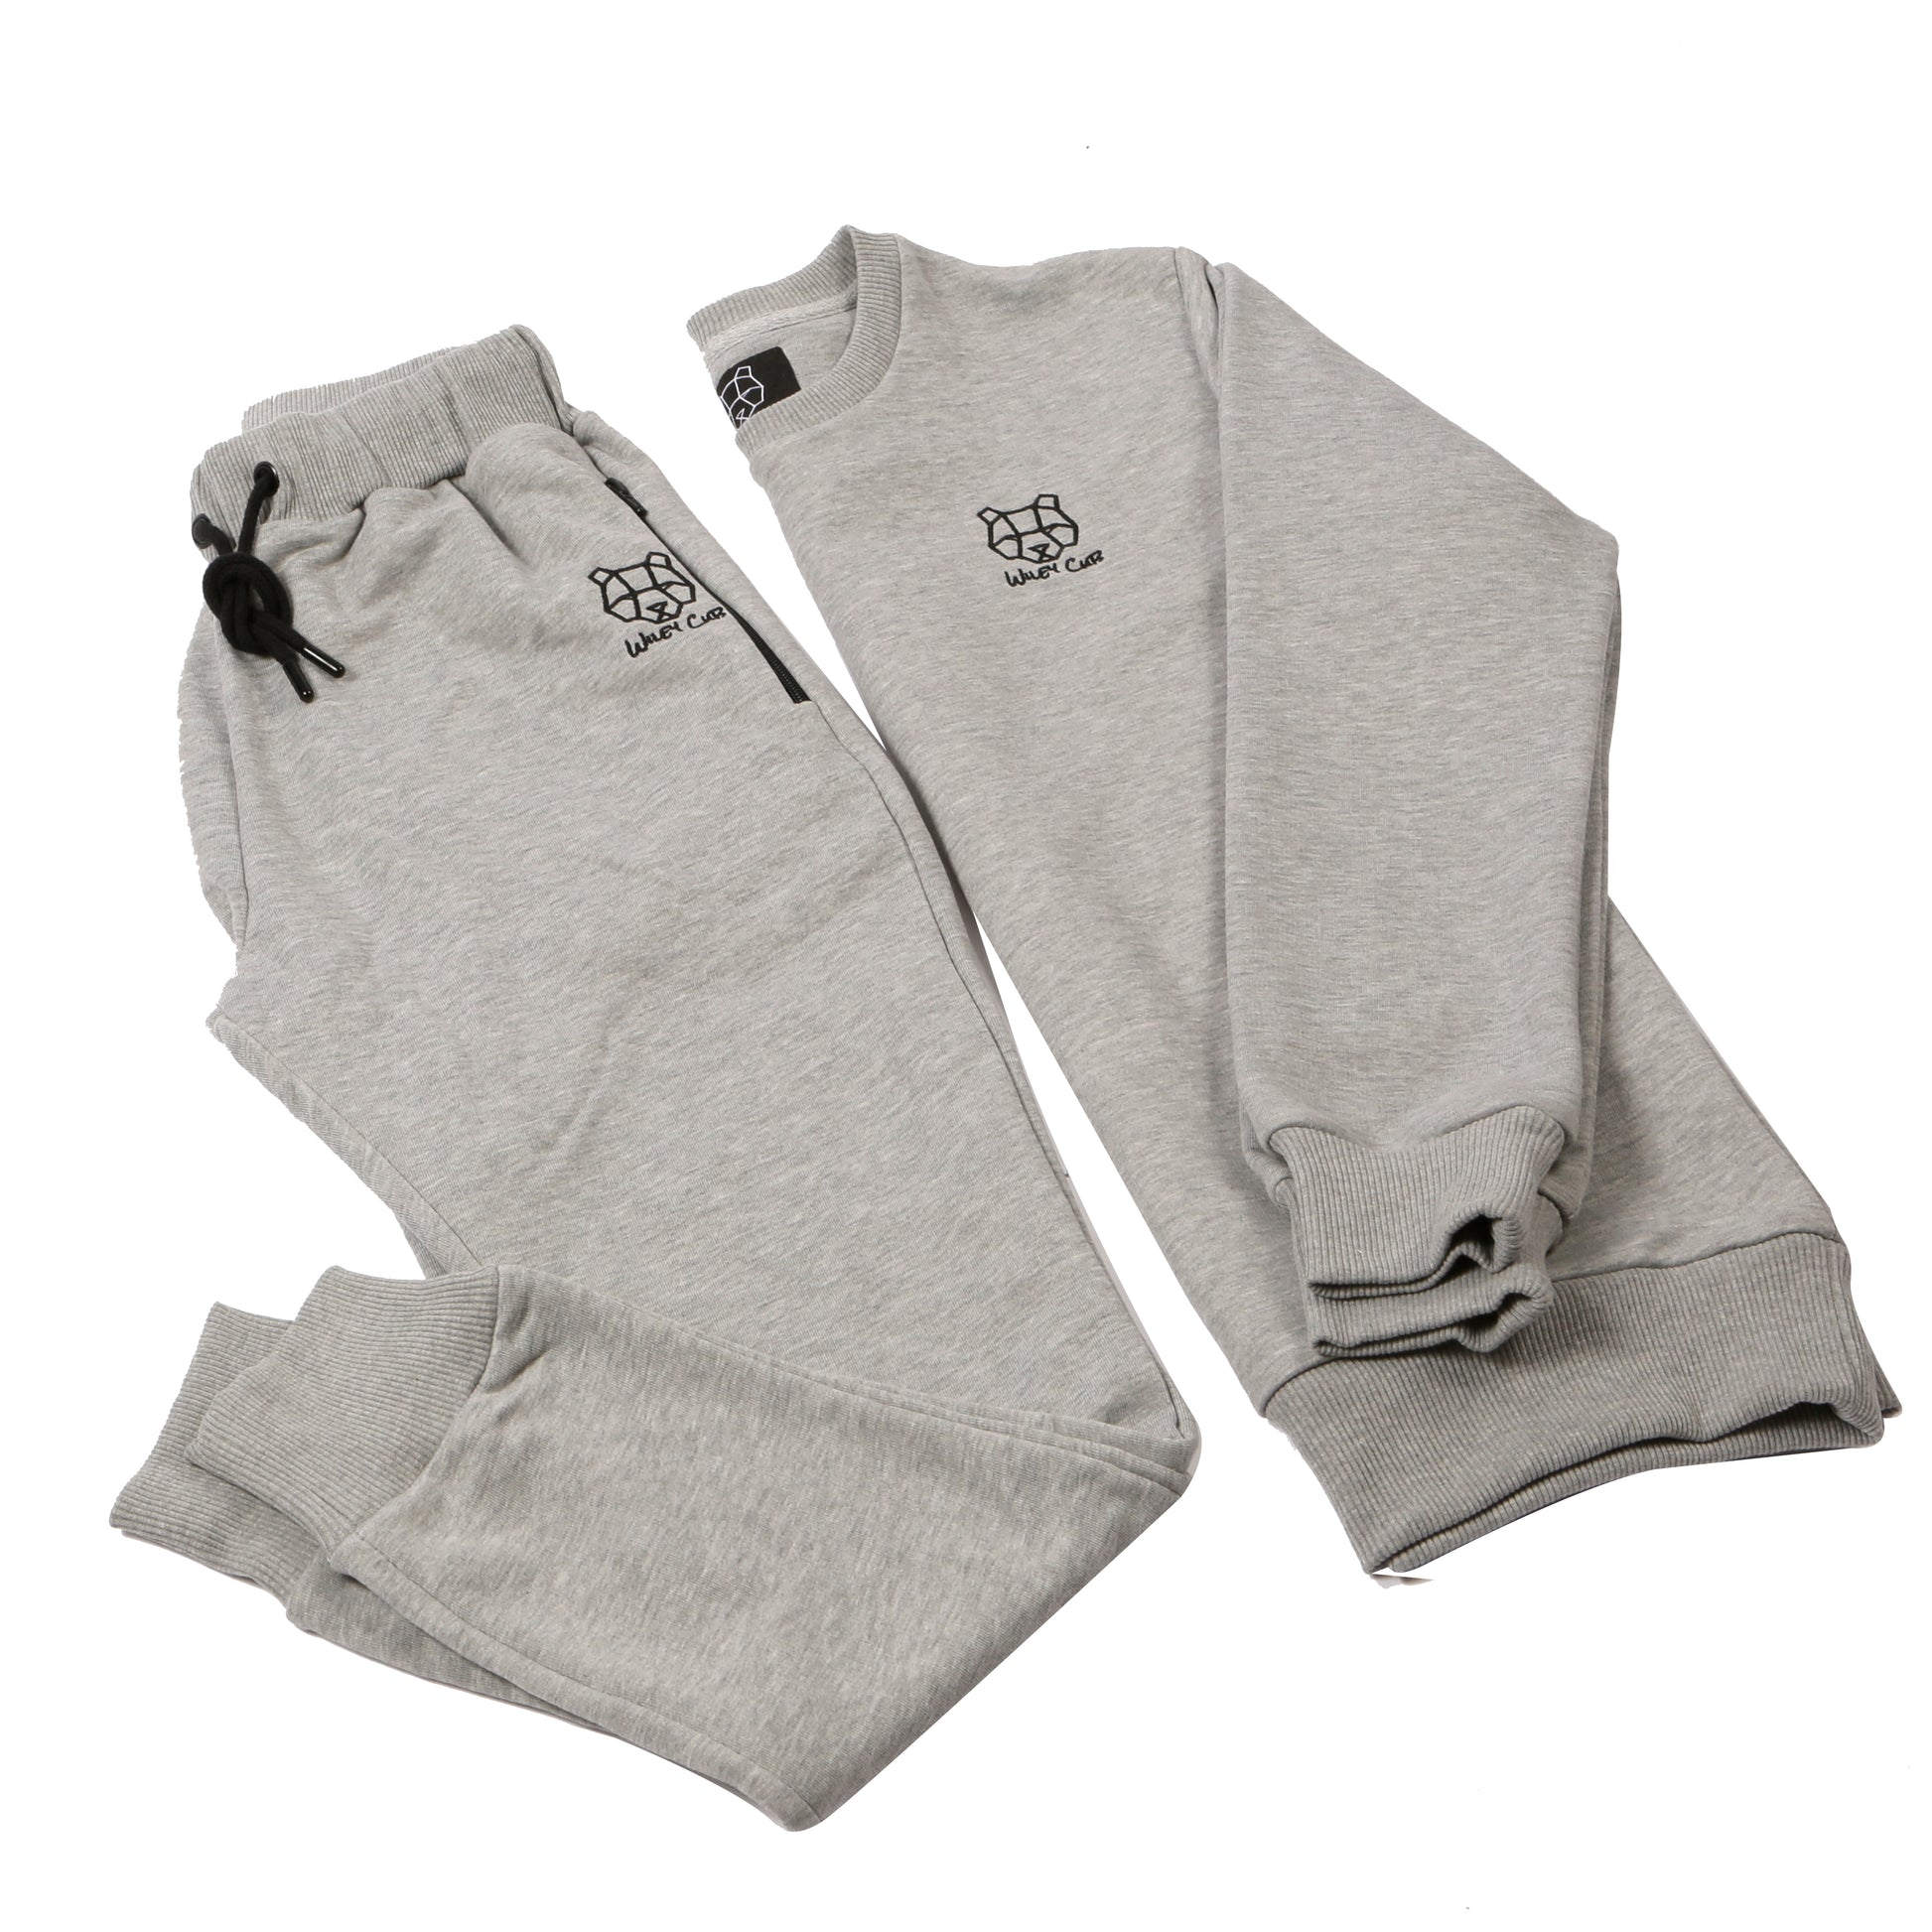 Wiley bear cub tracksuit sweatshirt and joggers christmas gift ideas for men and boys